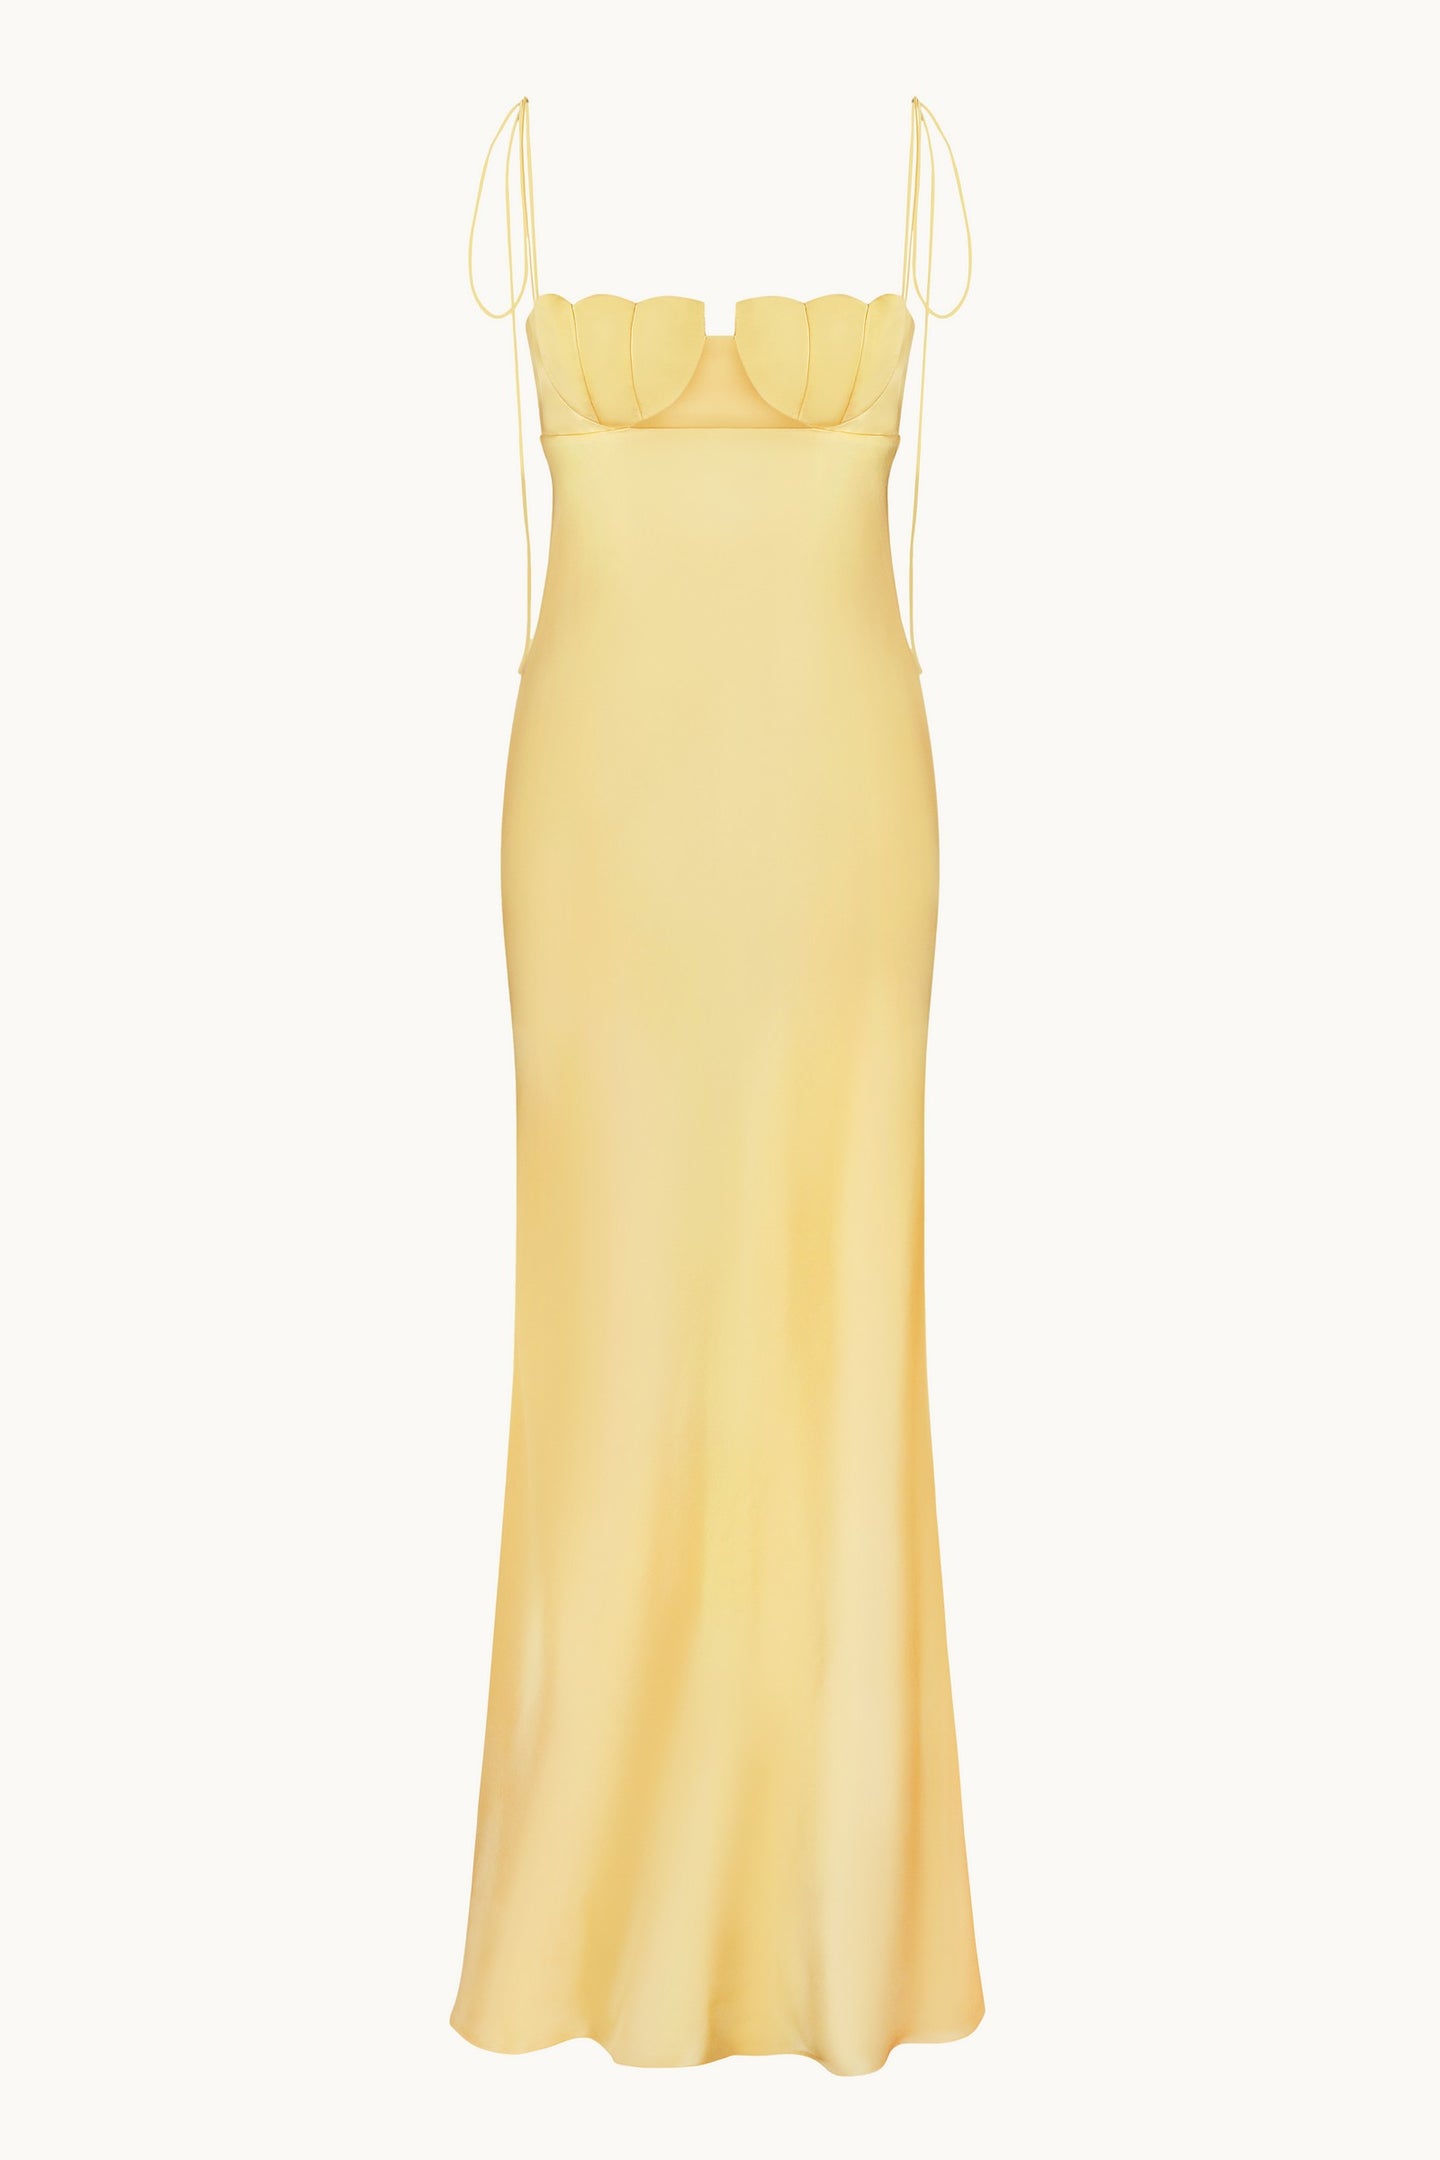 Tulip yellow dress front view